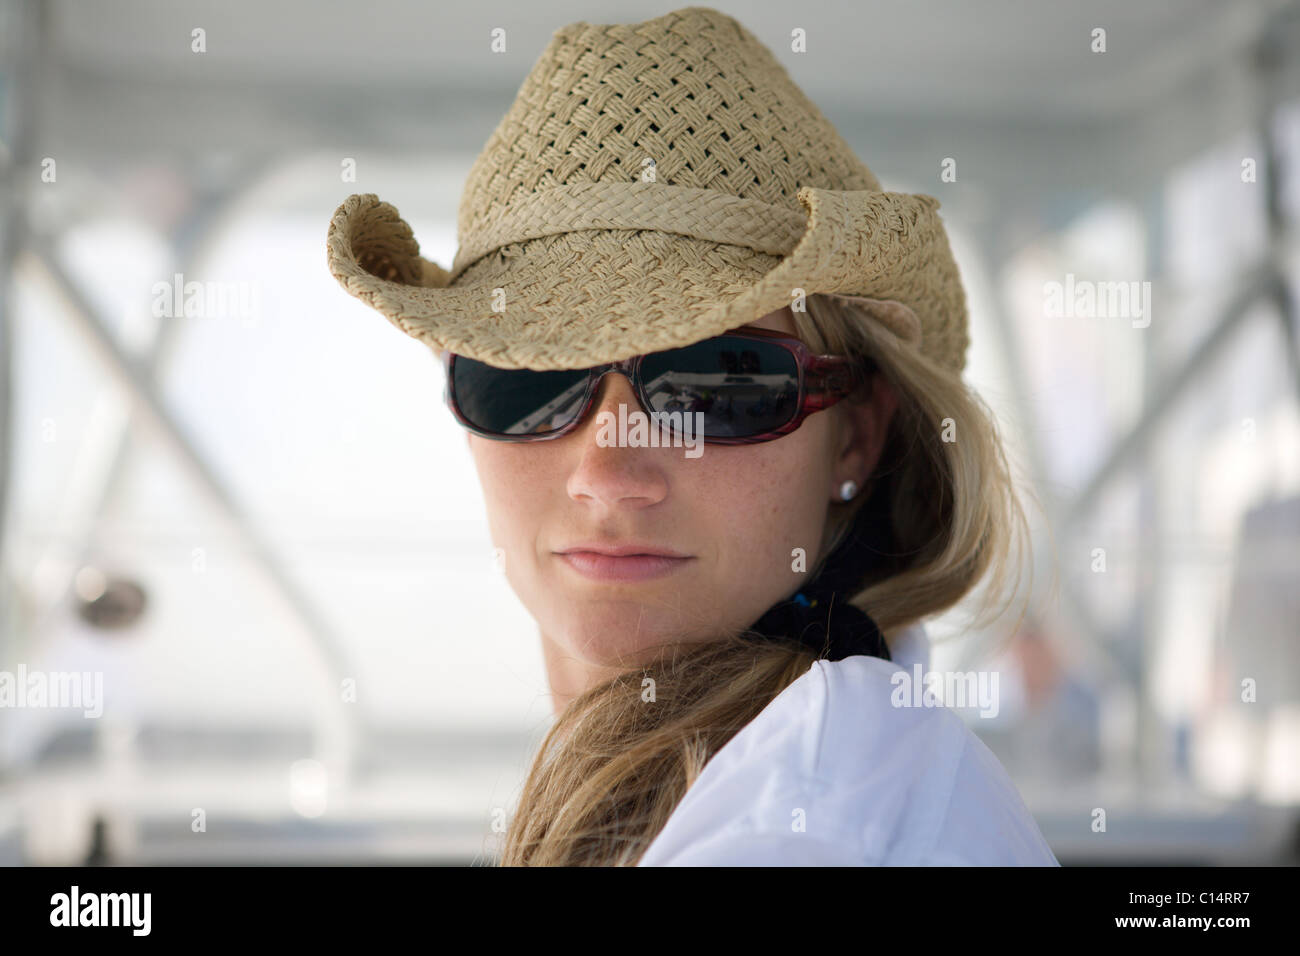 A close-up of a blonde woman as she looks at the camera wearing sunglasses and a straw hat. Stock Photo